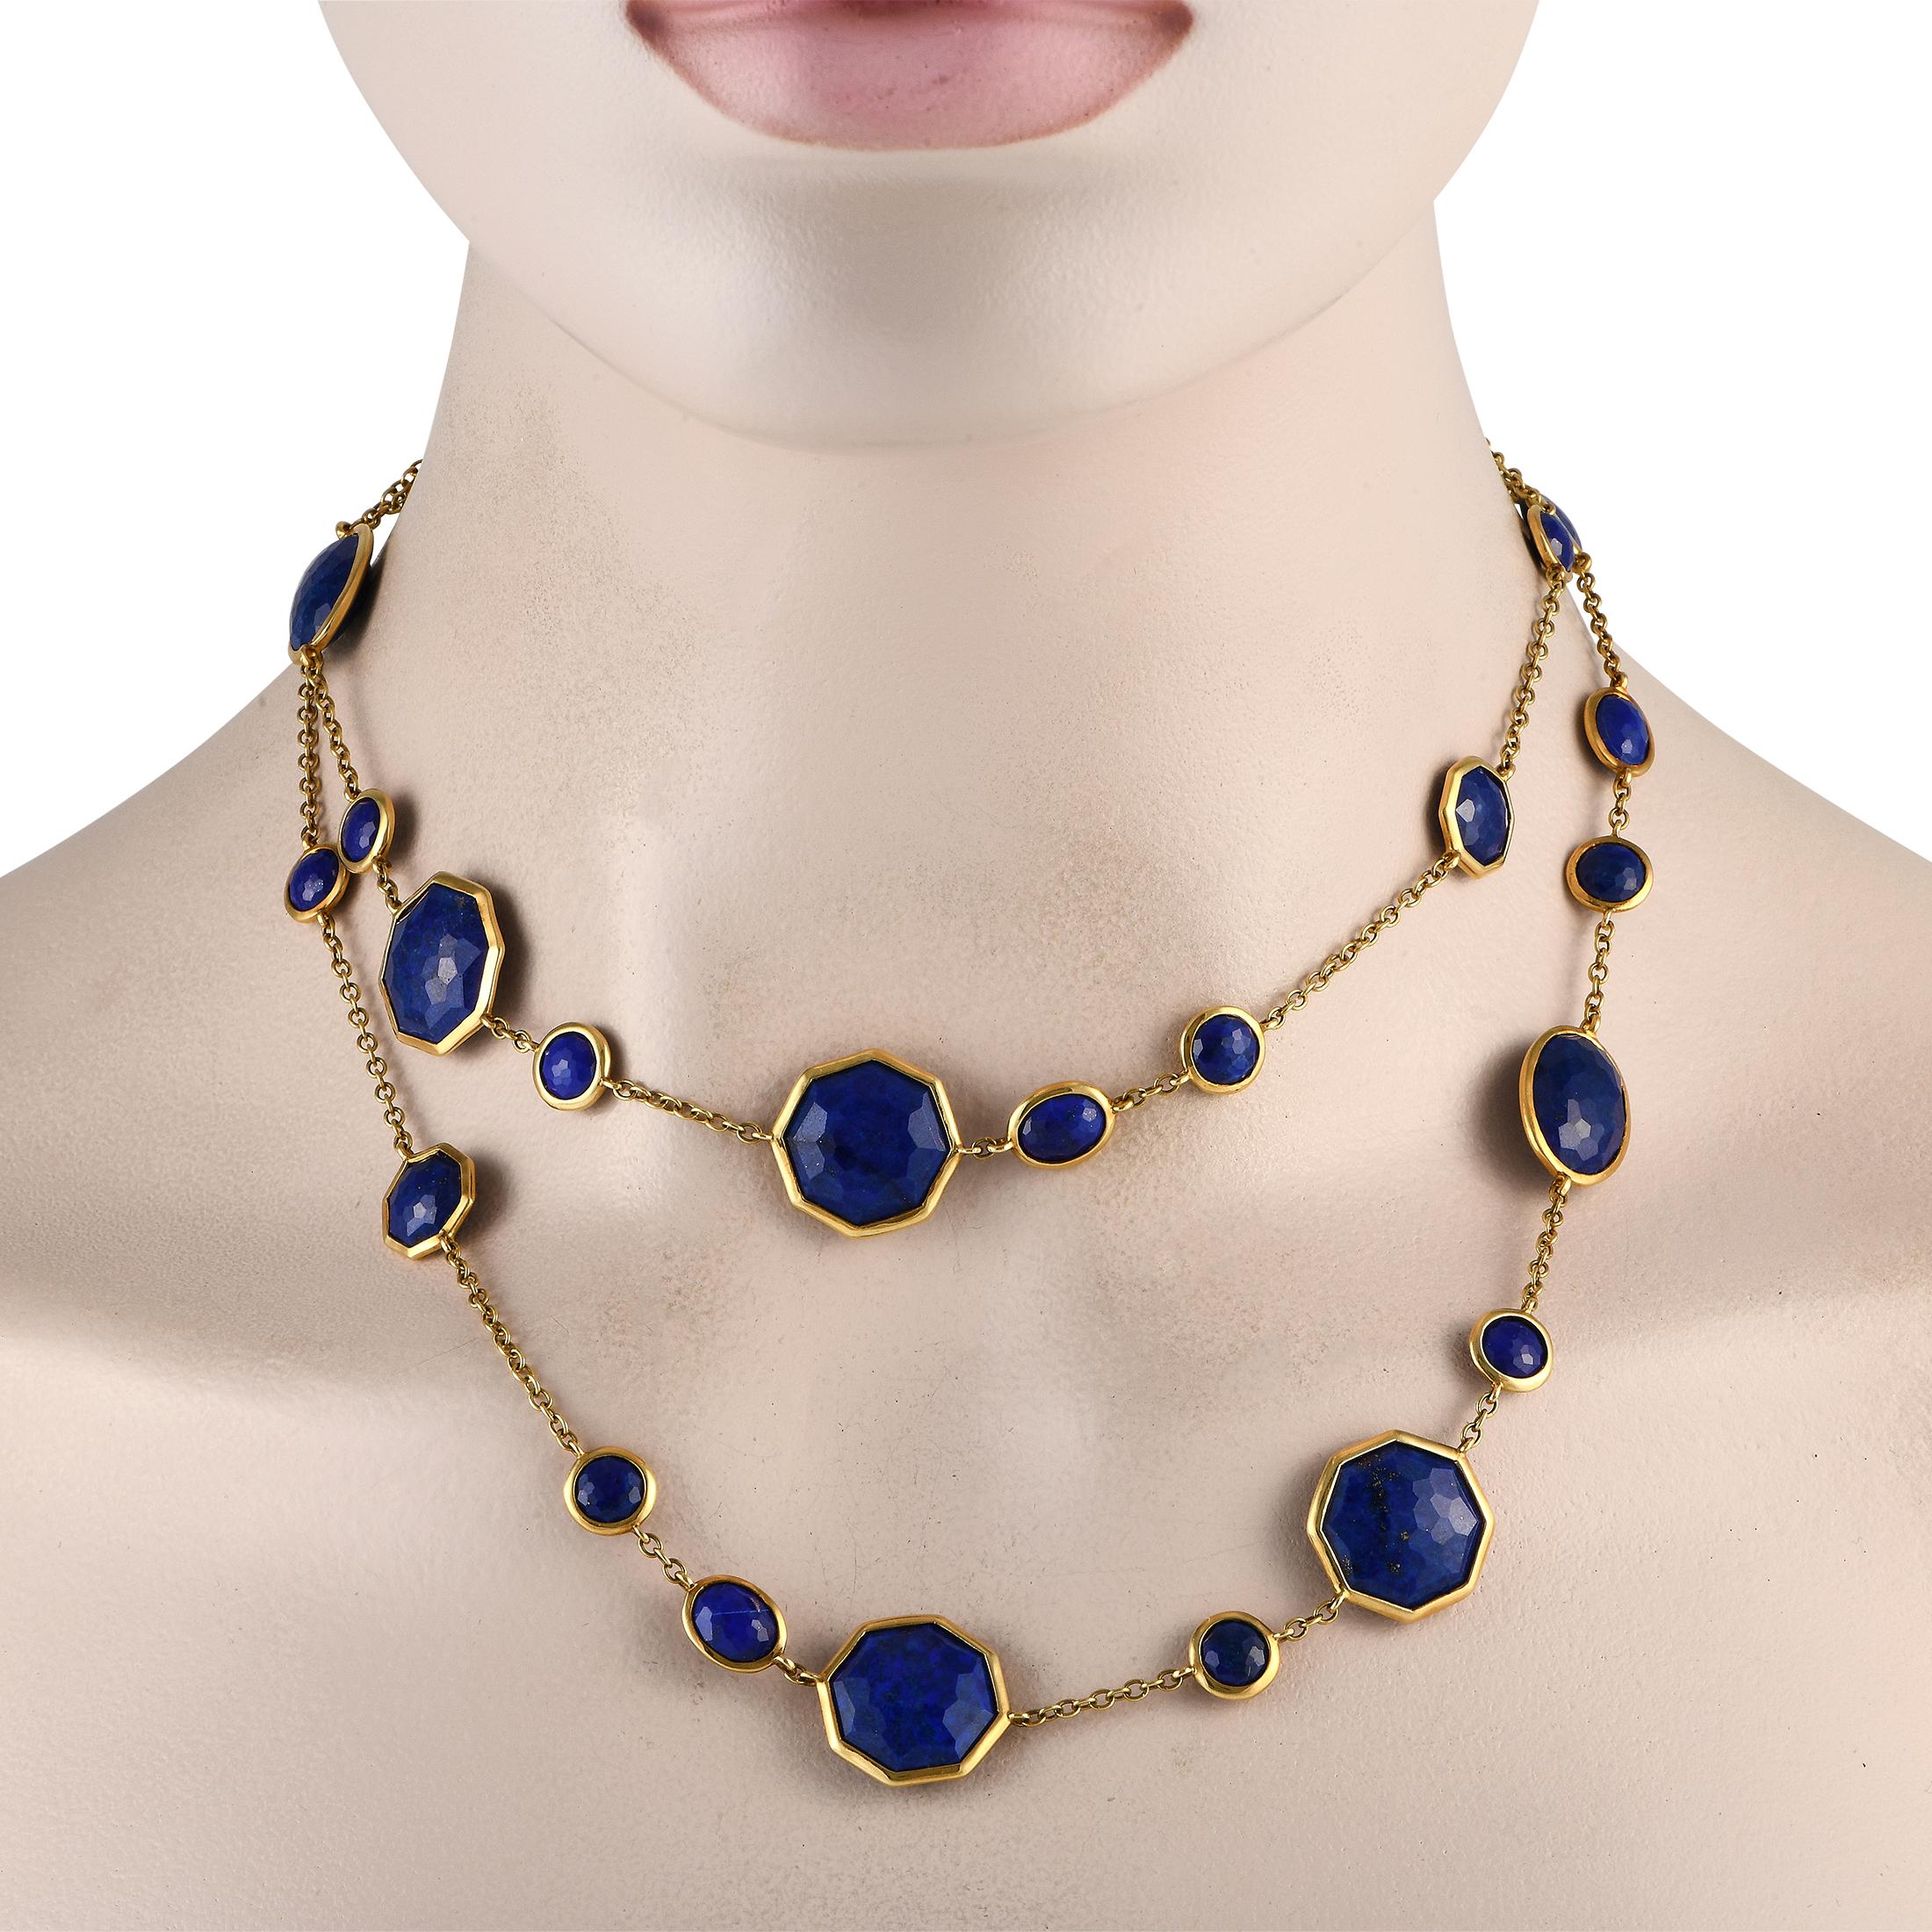 The geometric beauty and elegance of this long necklace will surely bring character to your style. From Ippolita, here is a 36-inch-long necklace in 18K yellow gold adorned with multi-sized faceted lapis lazuli gemstones in round, oval, and